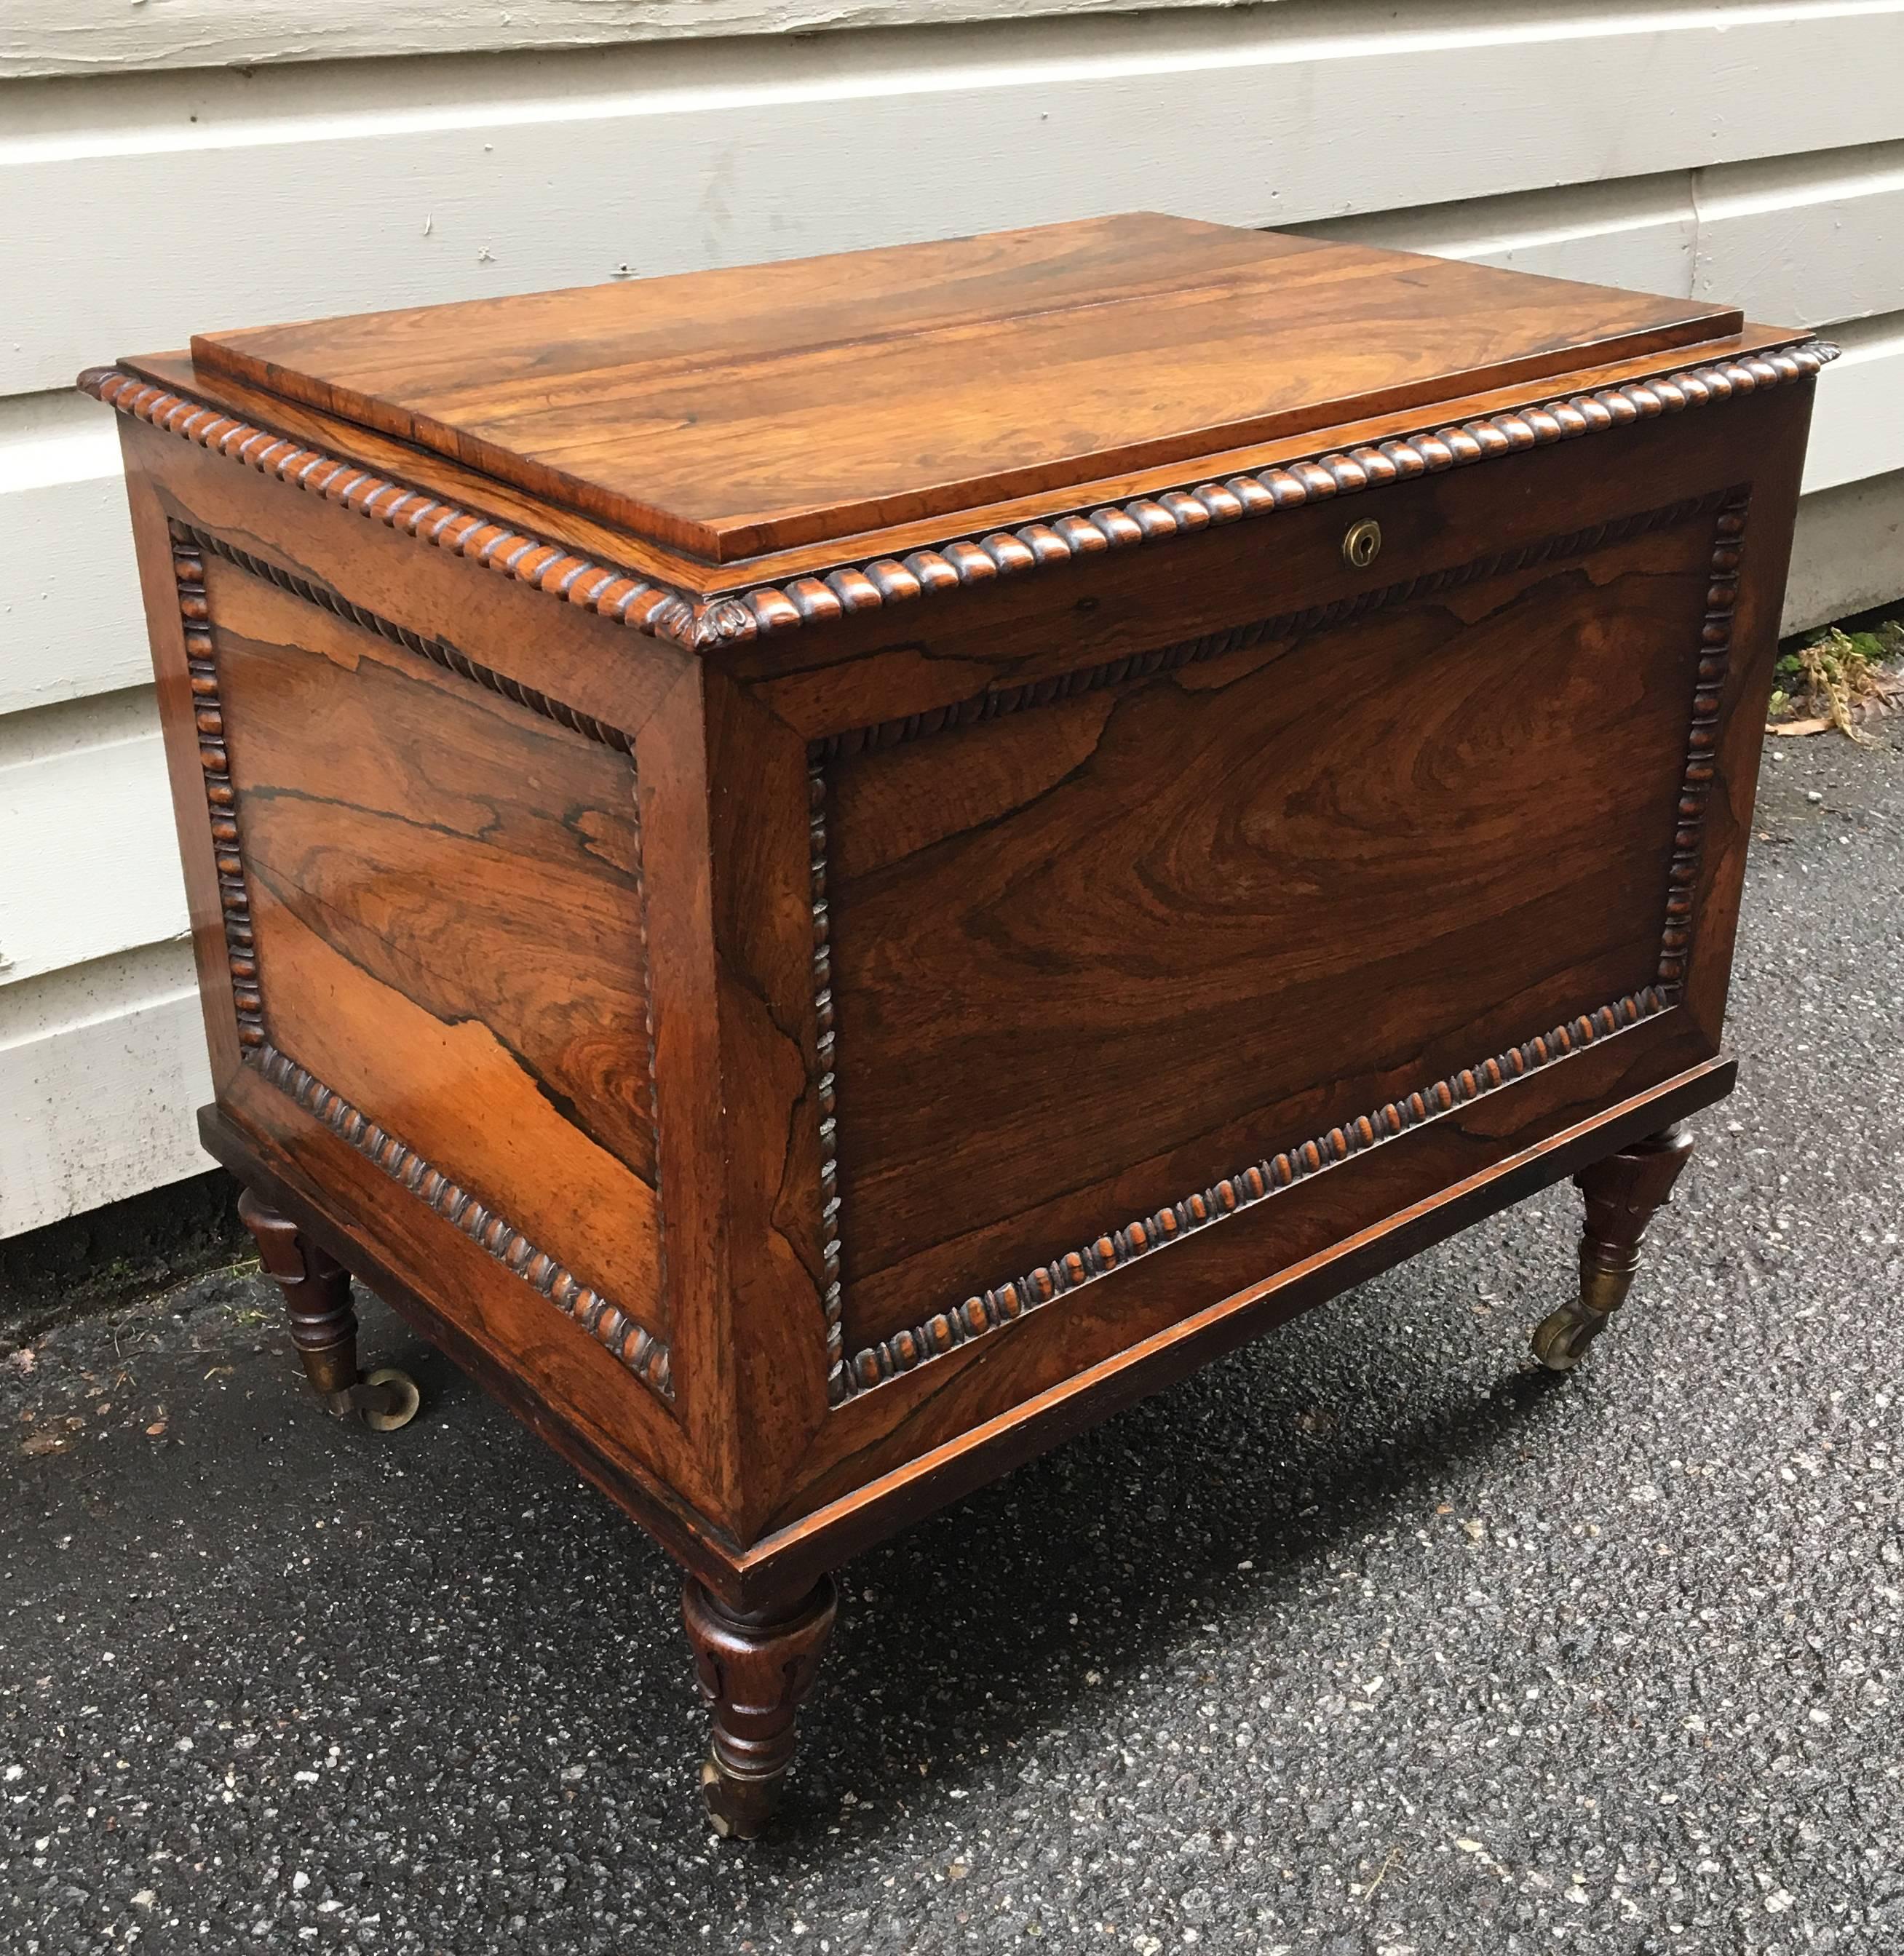 This Early 19th Century English Regency Campaign rosewood canterbury has original casters and original lock. The interior is divided into three equal sections.